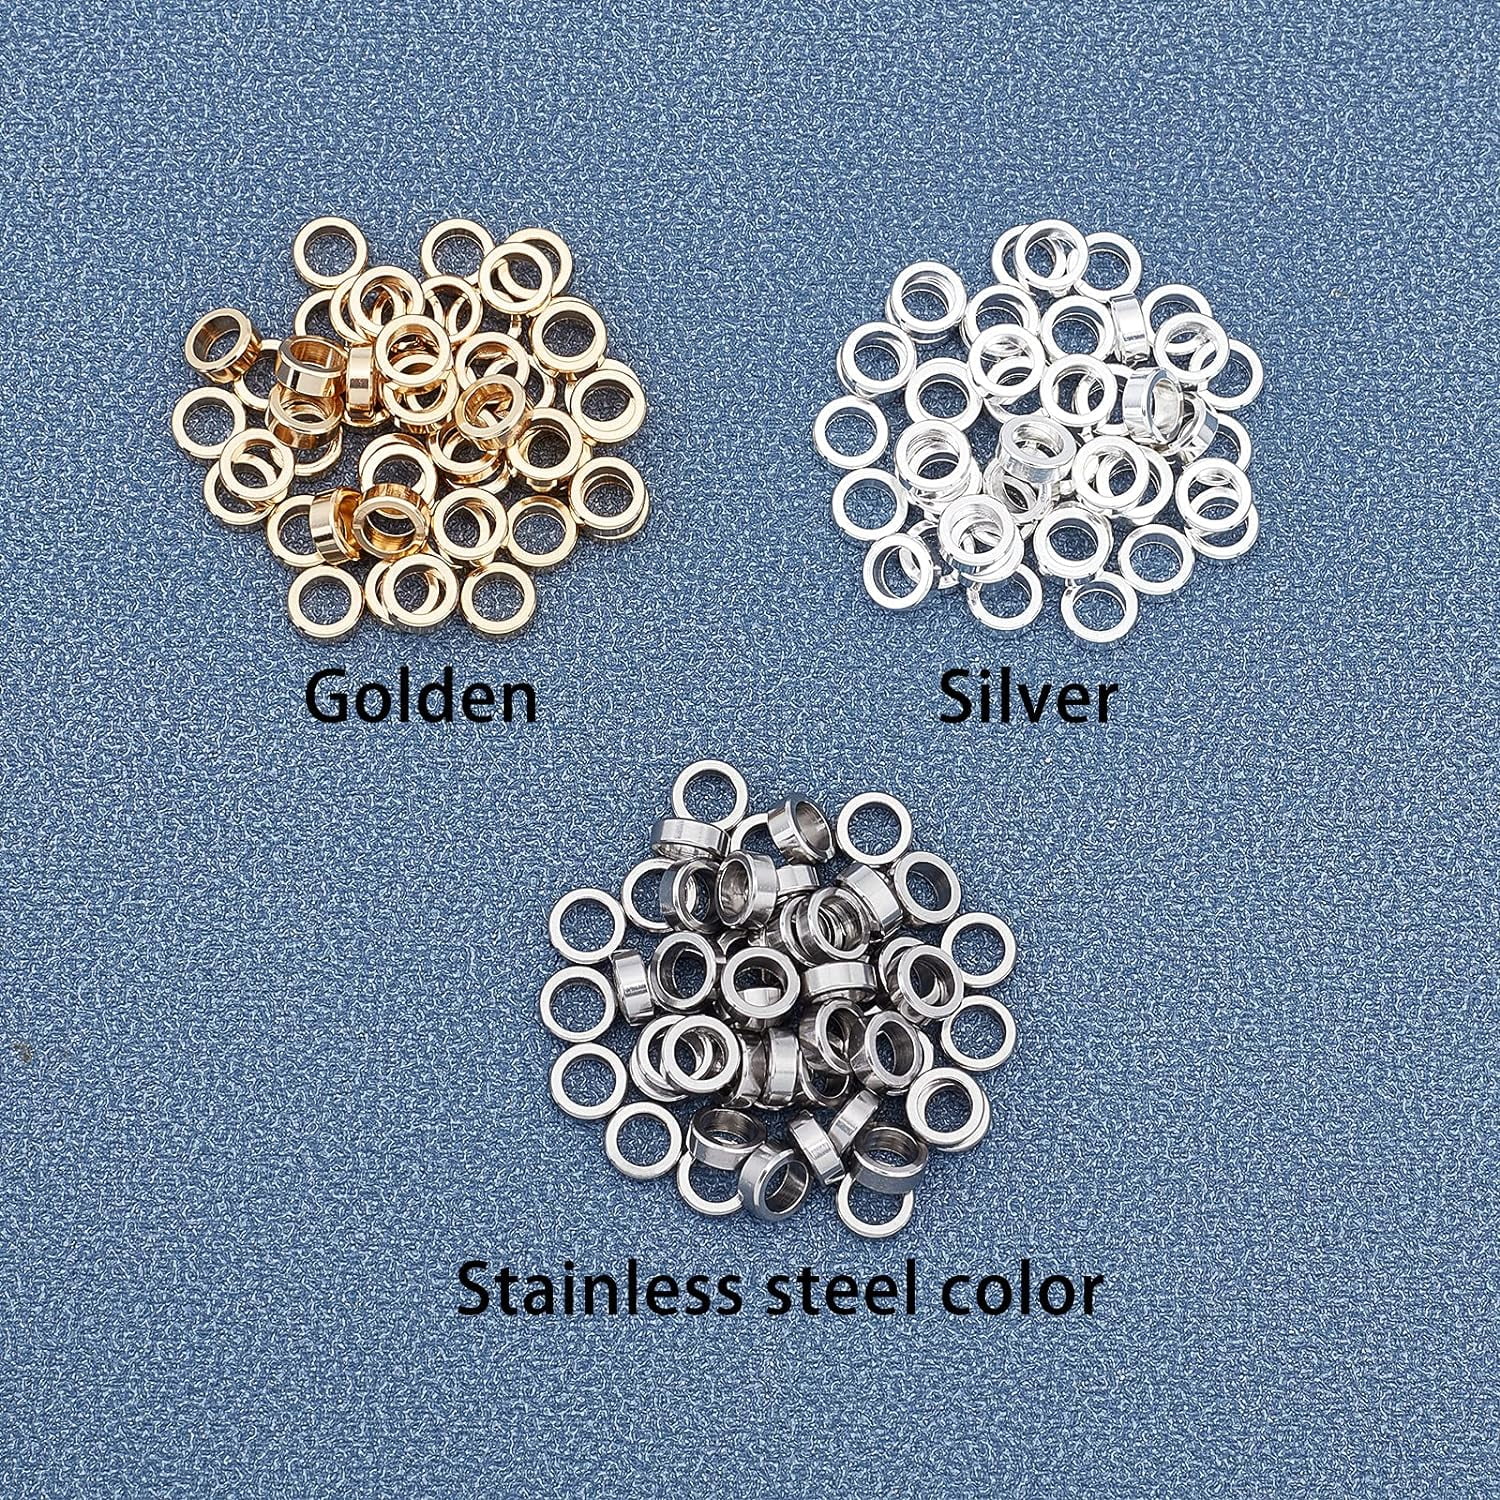 140pcs 2-7mm Rondelle Stainless Steel Beads Silver Spacer Beads 1-5mm Hole  for Jewelry Making 